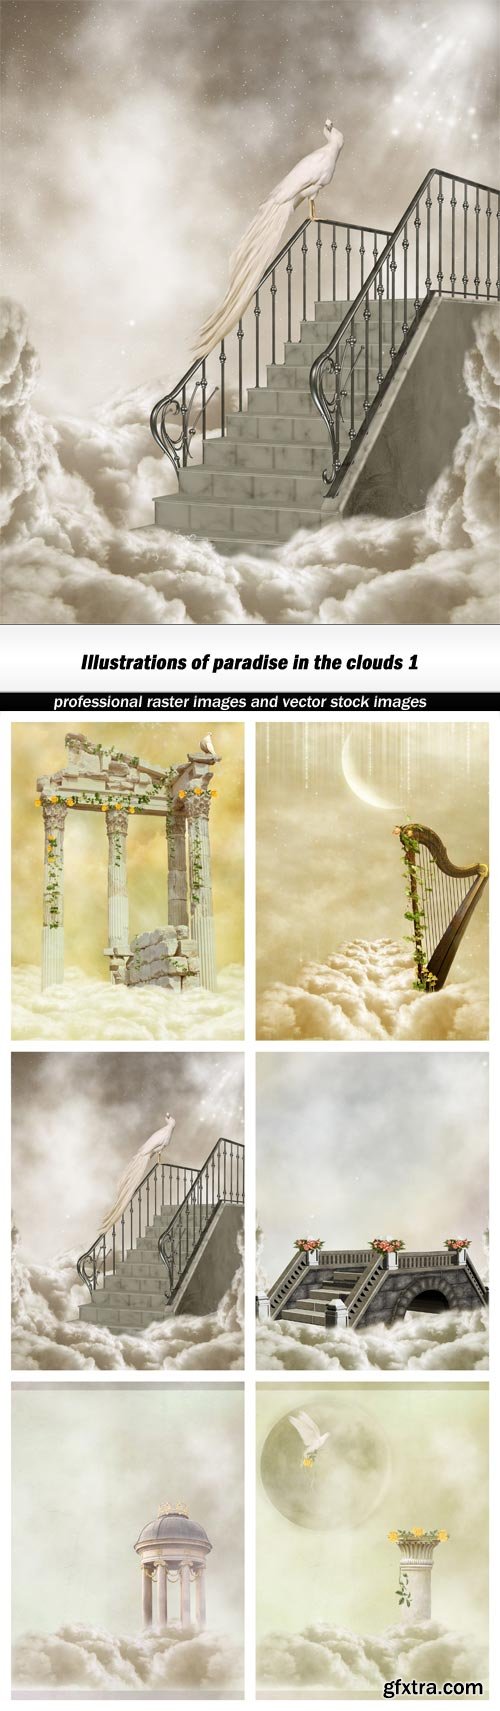 Illustrations of paradise in the clouds 1 - 6 UHQ JPEG